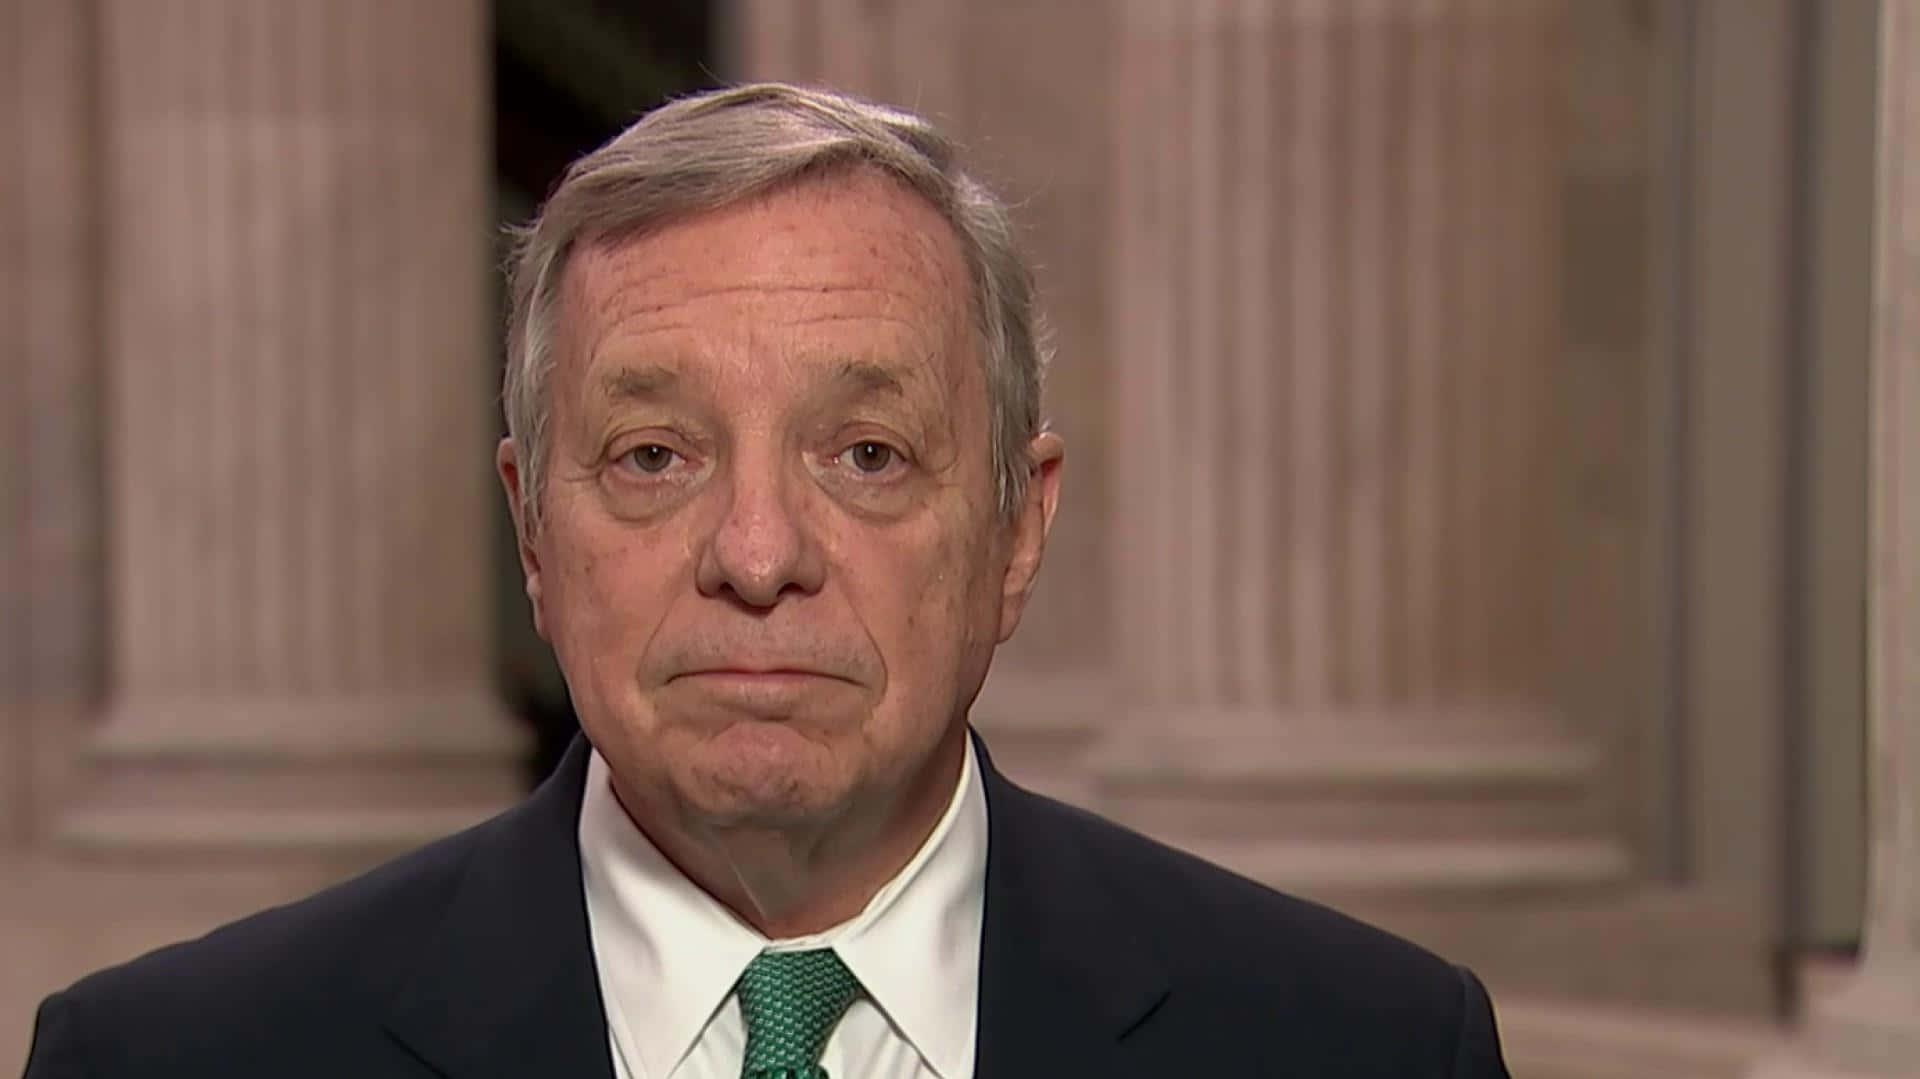 Download Richard Durbin With Straight Face Wallpaper